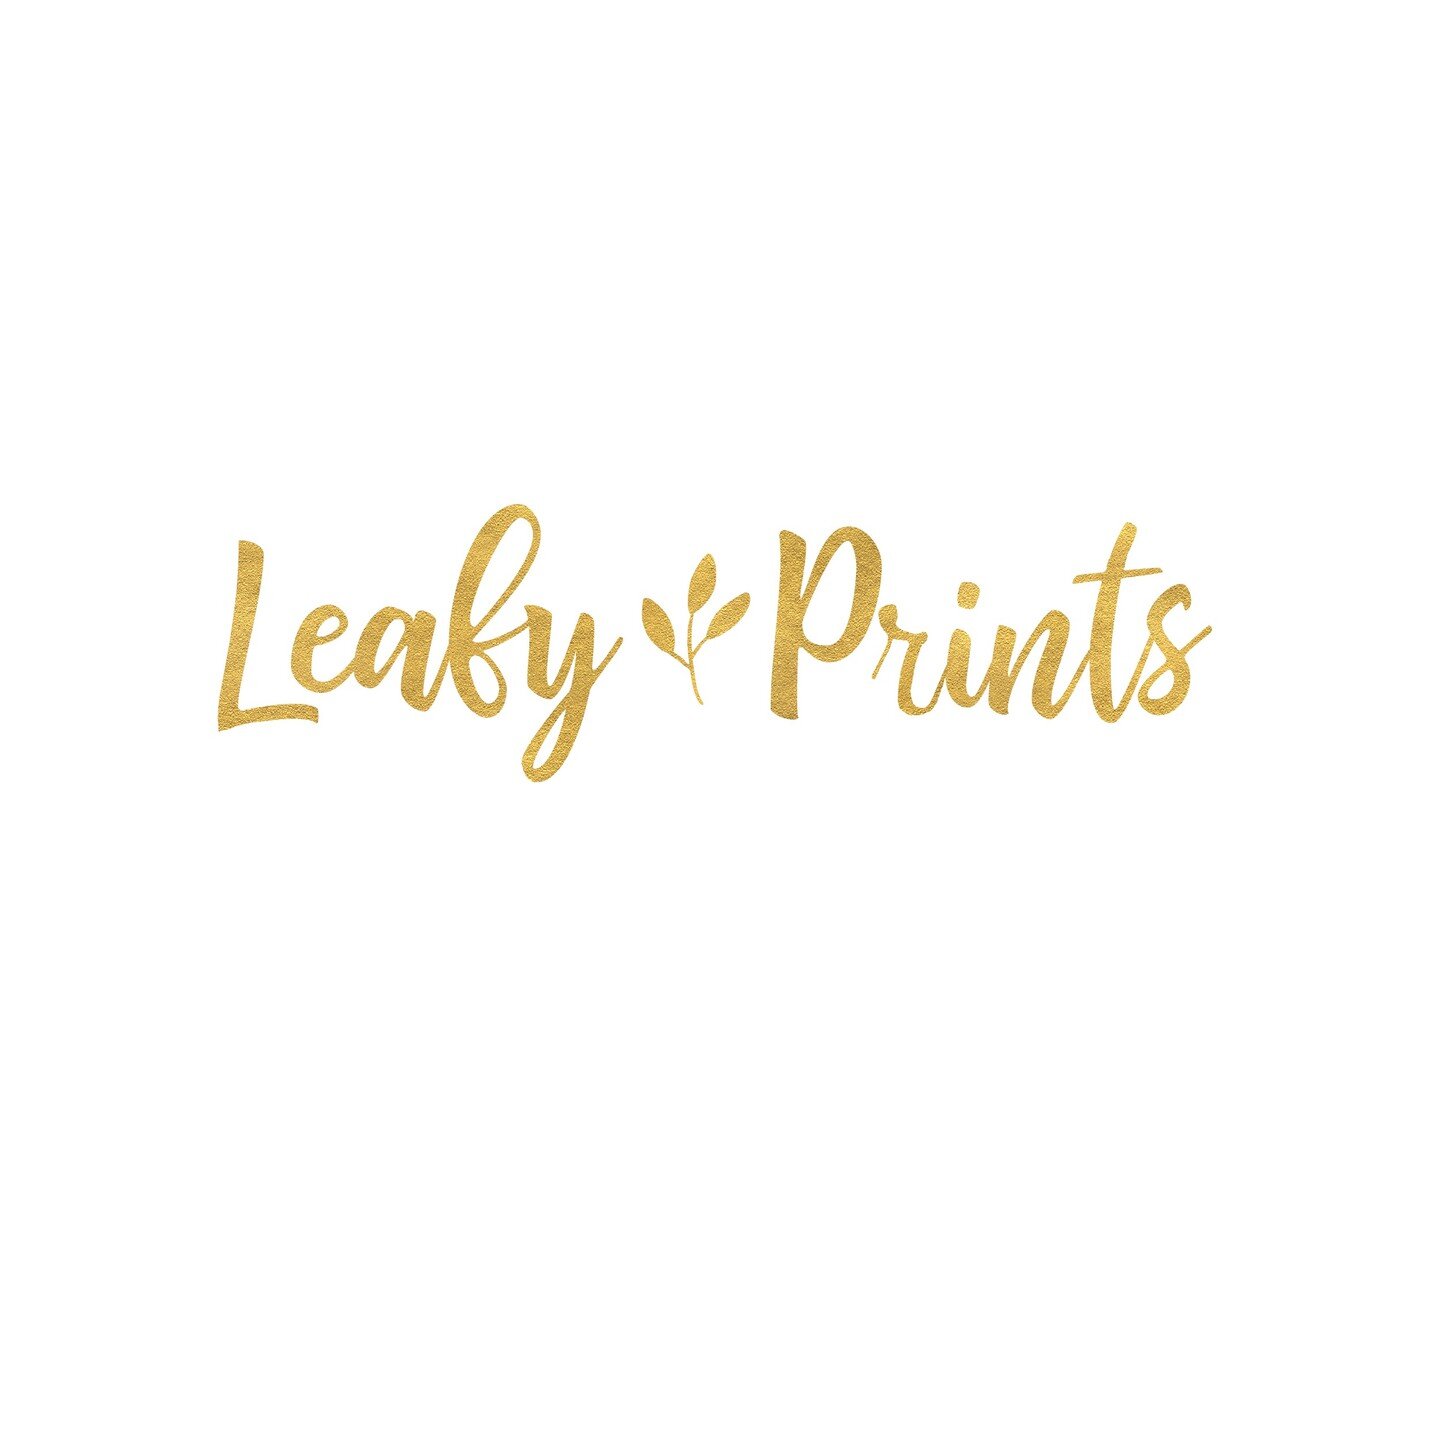 Hi, I'm Leafy Prints! We're just starting up but if you're looking for a bubbly eco-friendly local neighborhood shop - do check us out! Stay tuned for more!